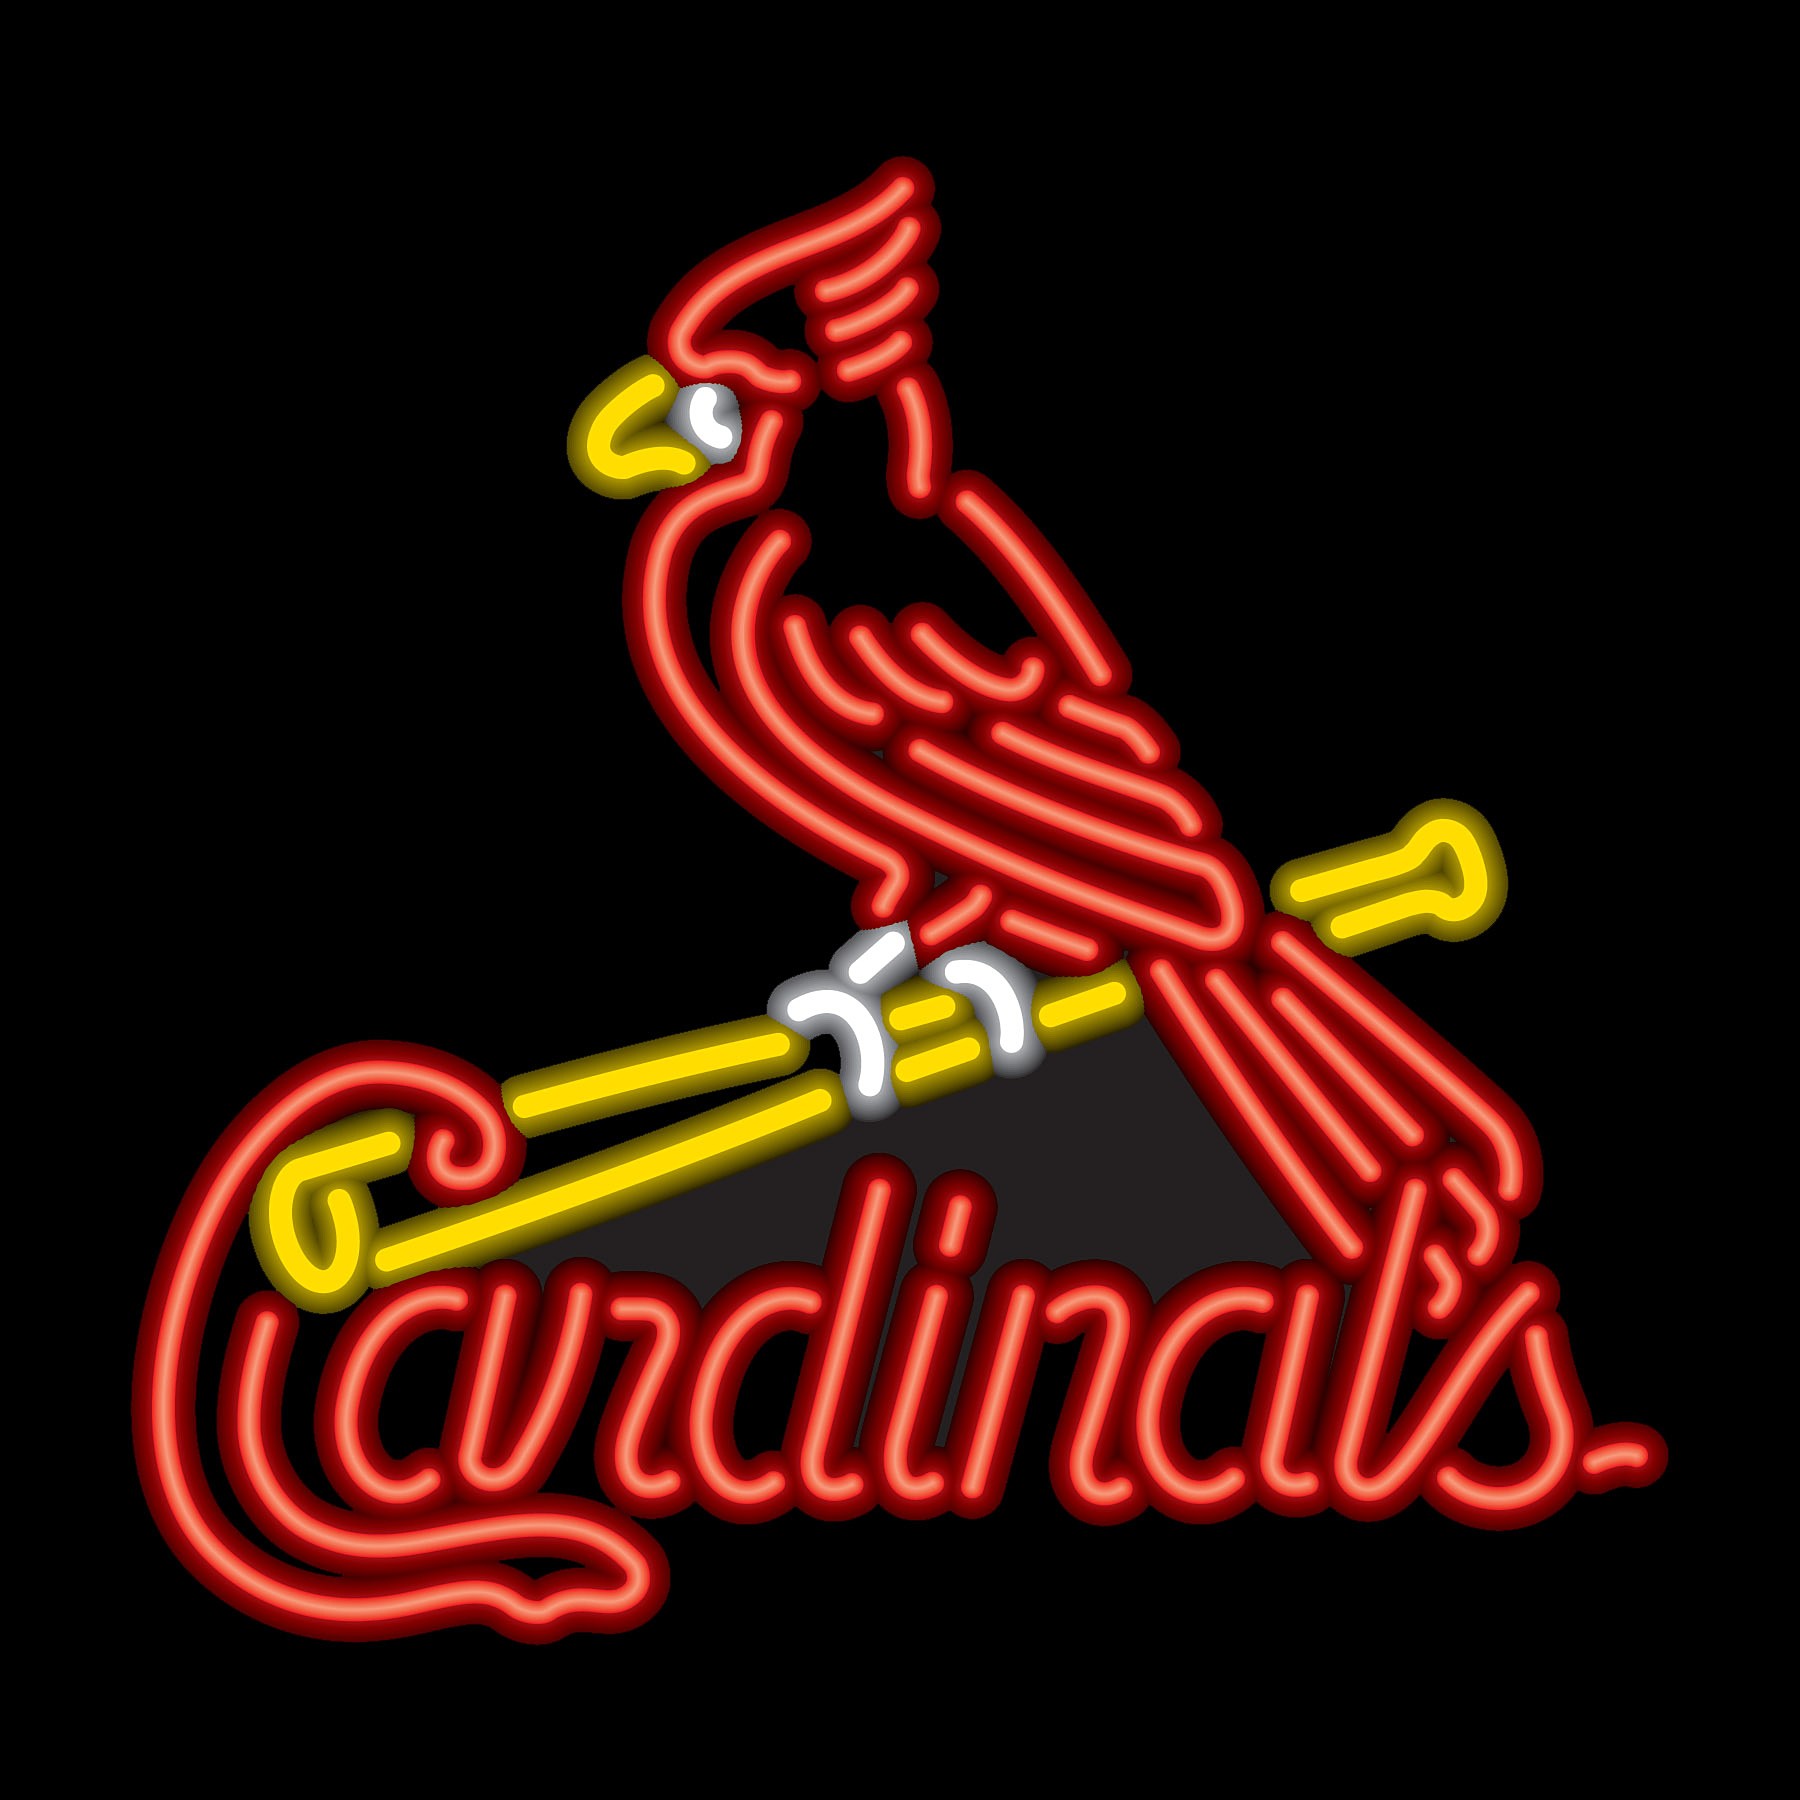 Wallpaper Everyday So You Can Enjoy Them All Dtoday A St Louis